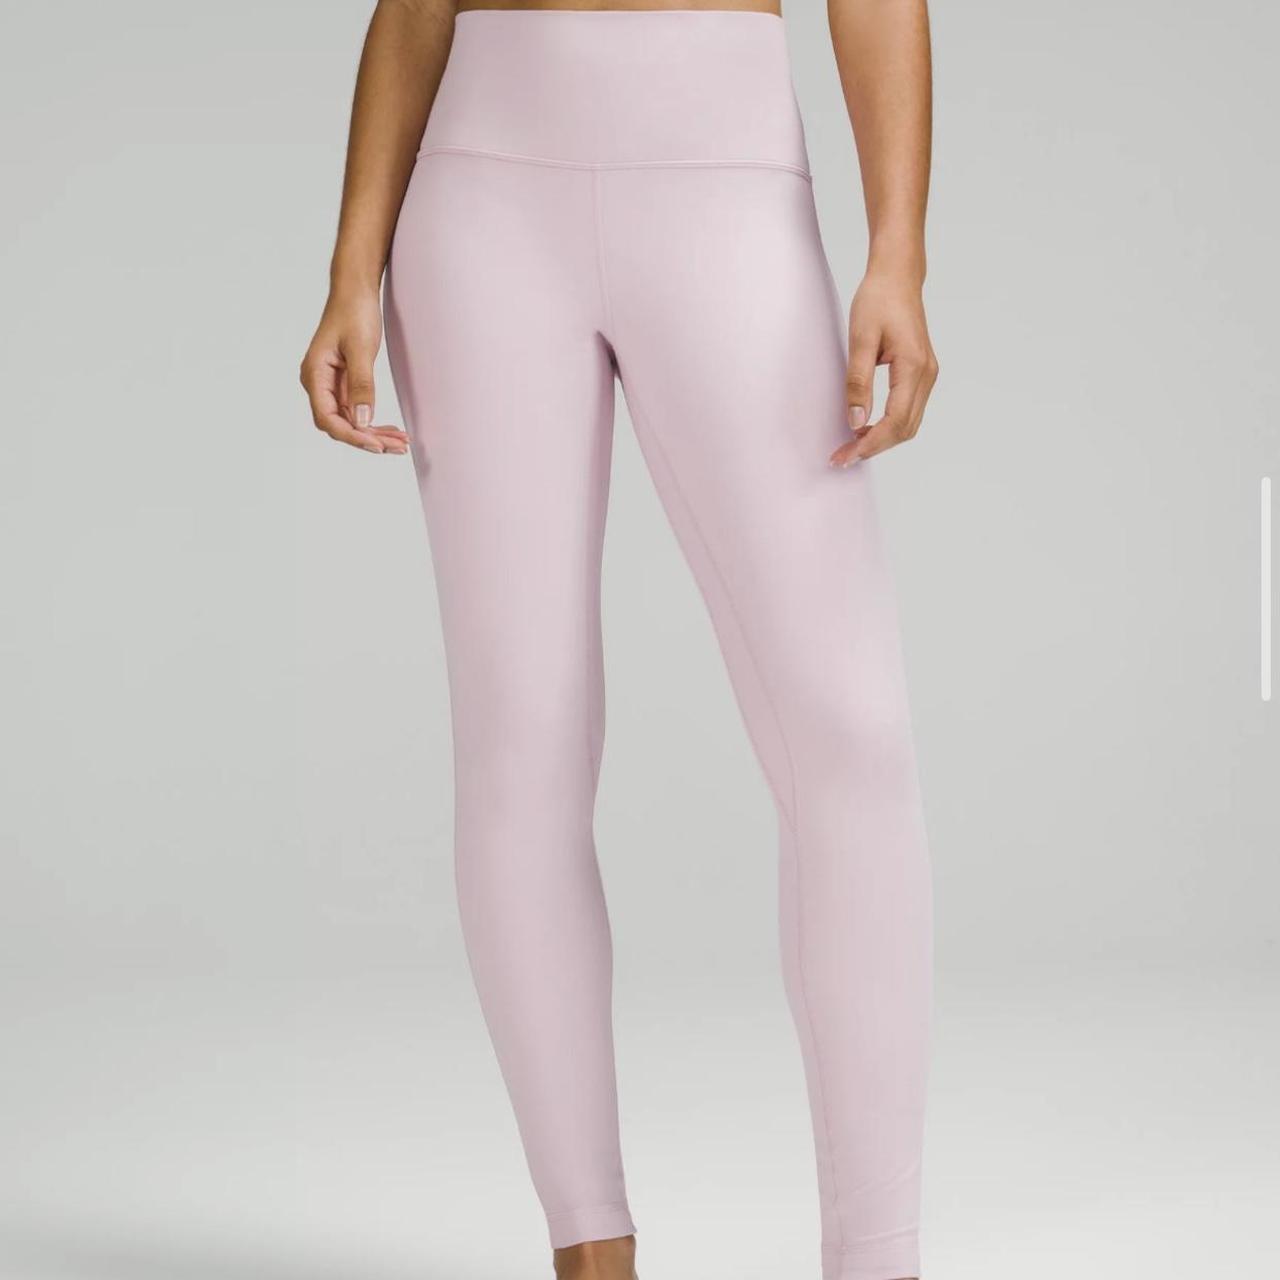 lululemon Align™ High-Rise Pant 28 in pink peony